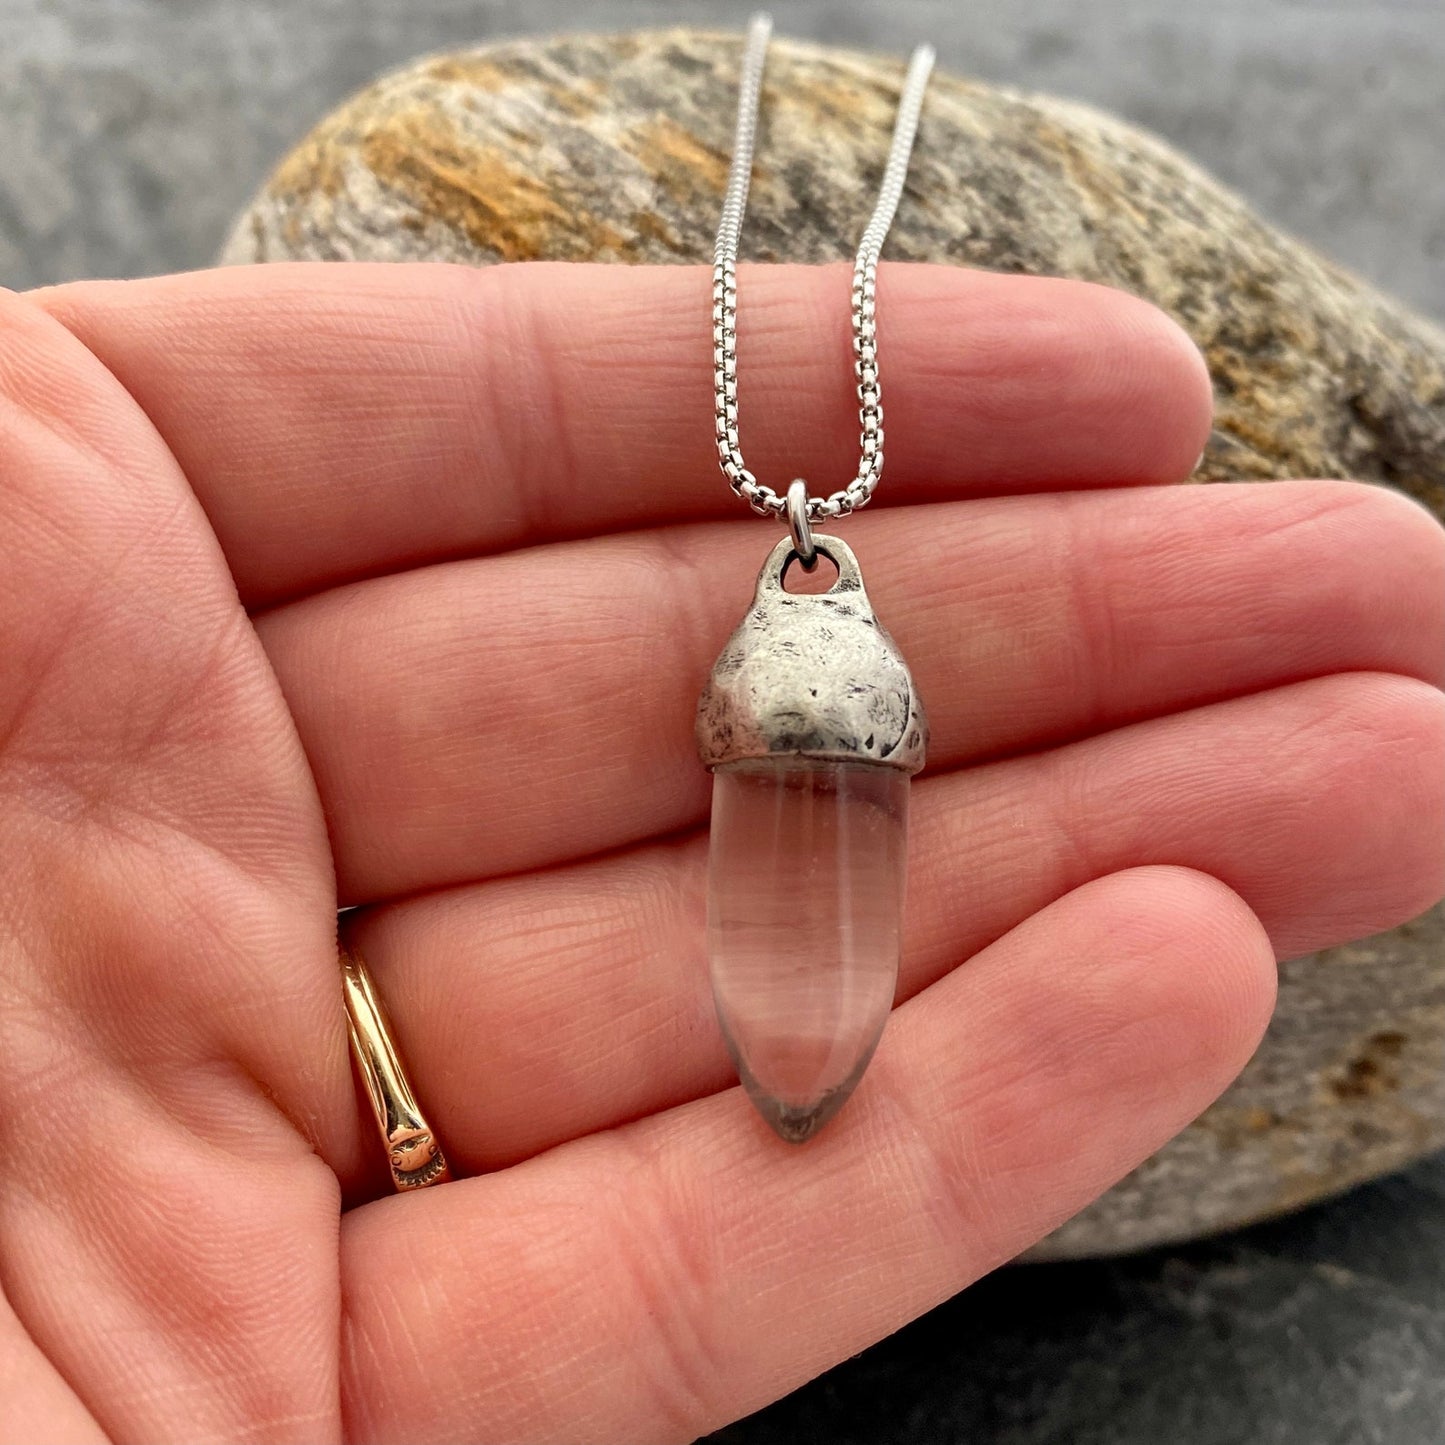 Men's Purity and Energy Necklace, Clear Crystal, Unisex Gemstone, Stone Protection Pendant, Stainless Steel, Men's Boyfriend Gift, GS-004